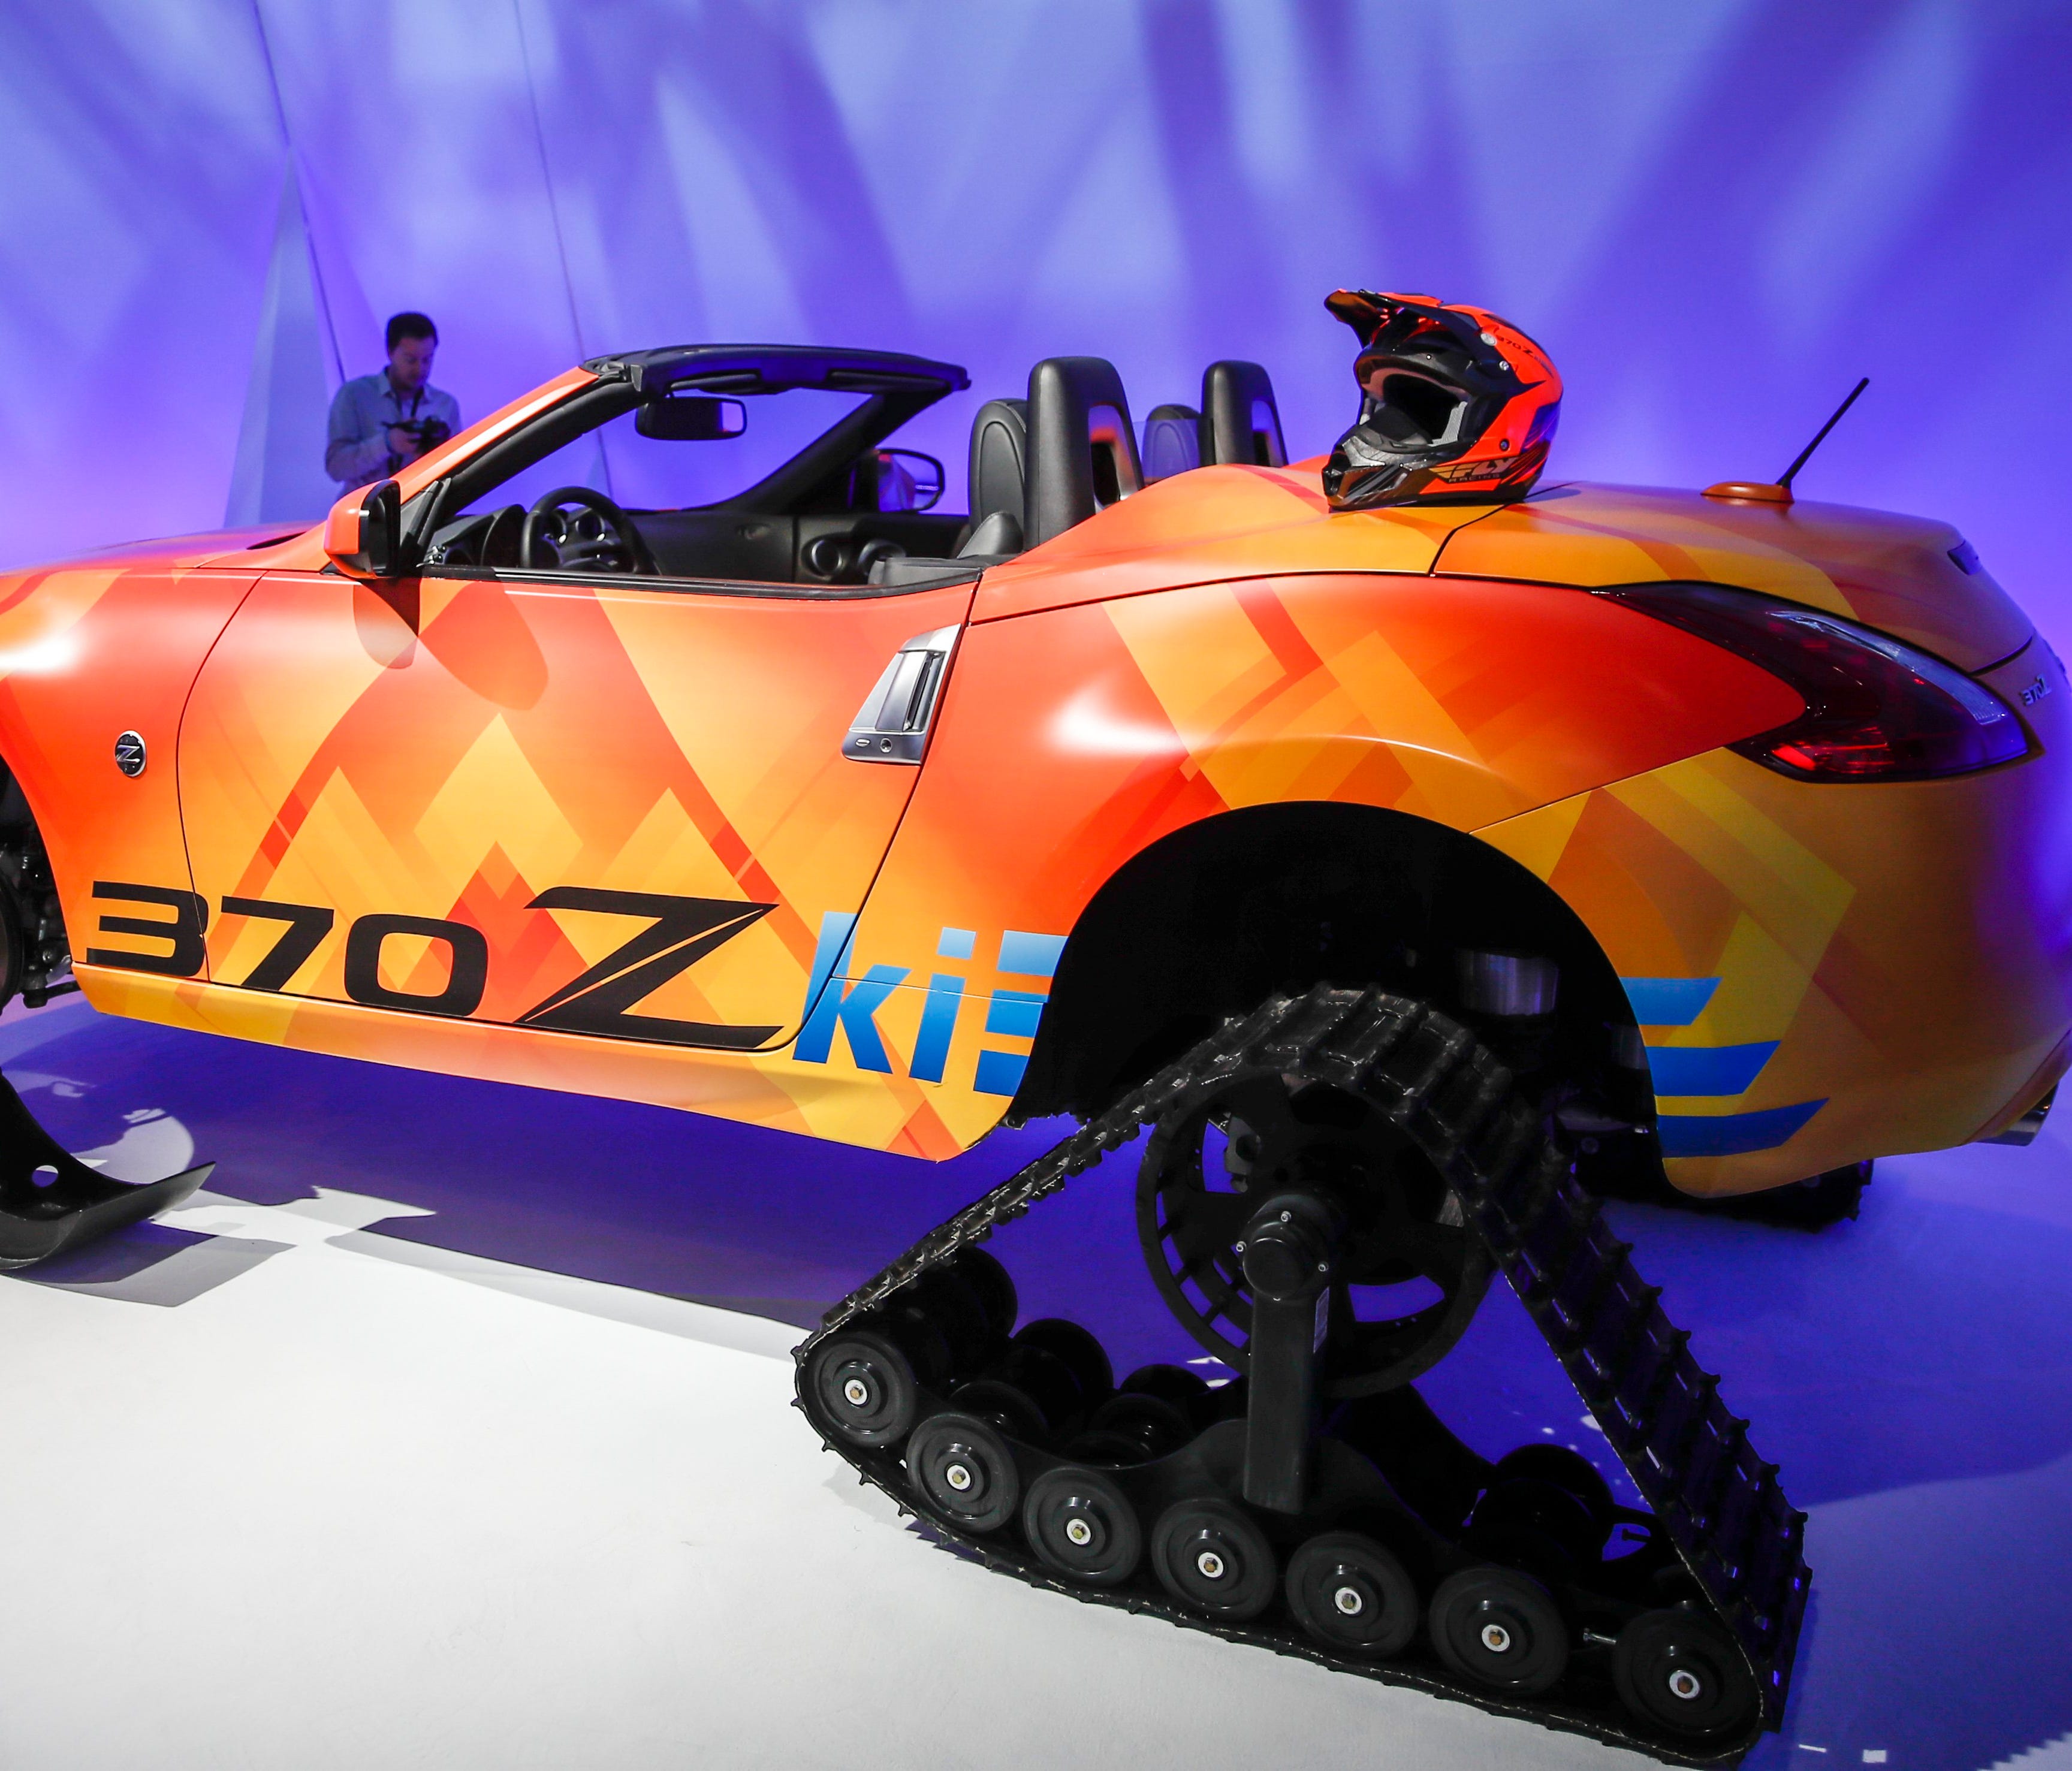 A Nissan 370Z track concept vehicle is displayed during the media preview at the Chicago Auto Show at McCormick Place in Chicago